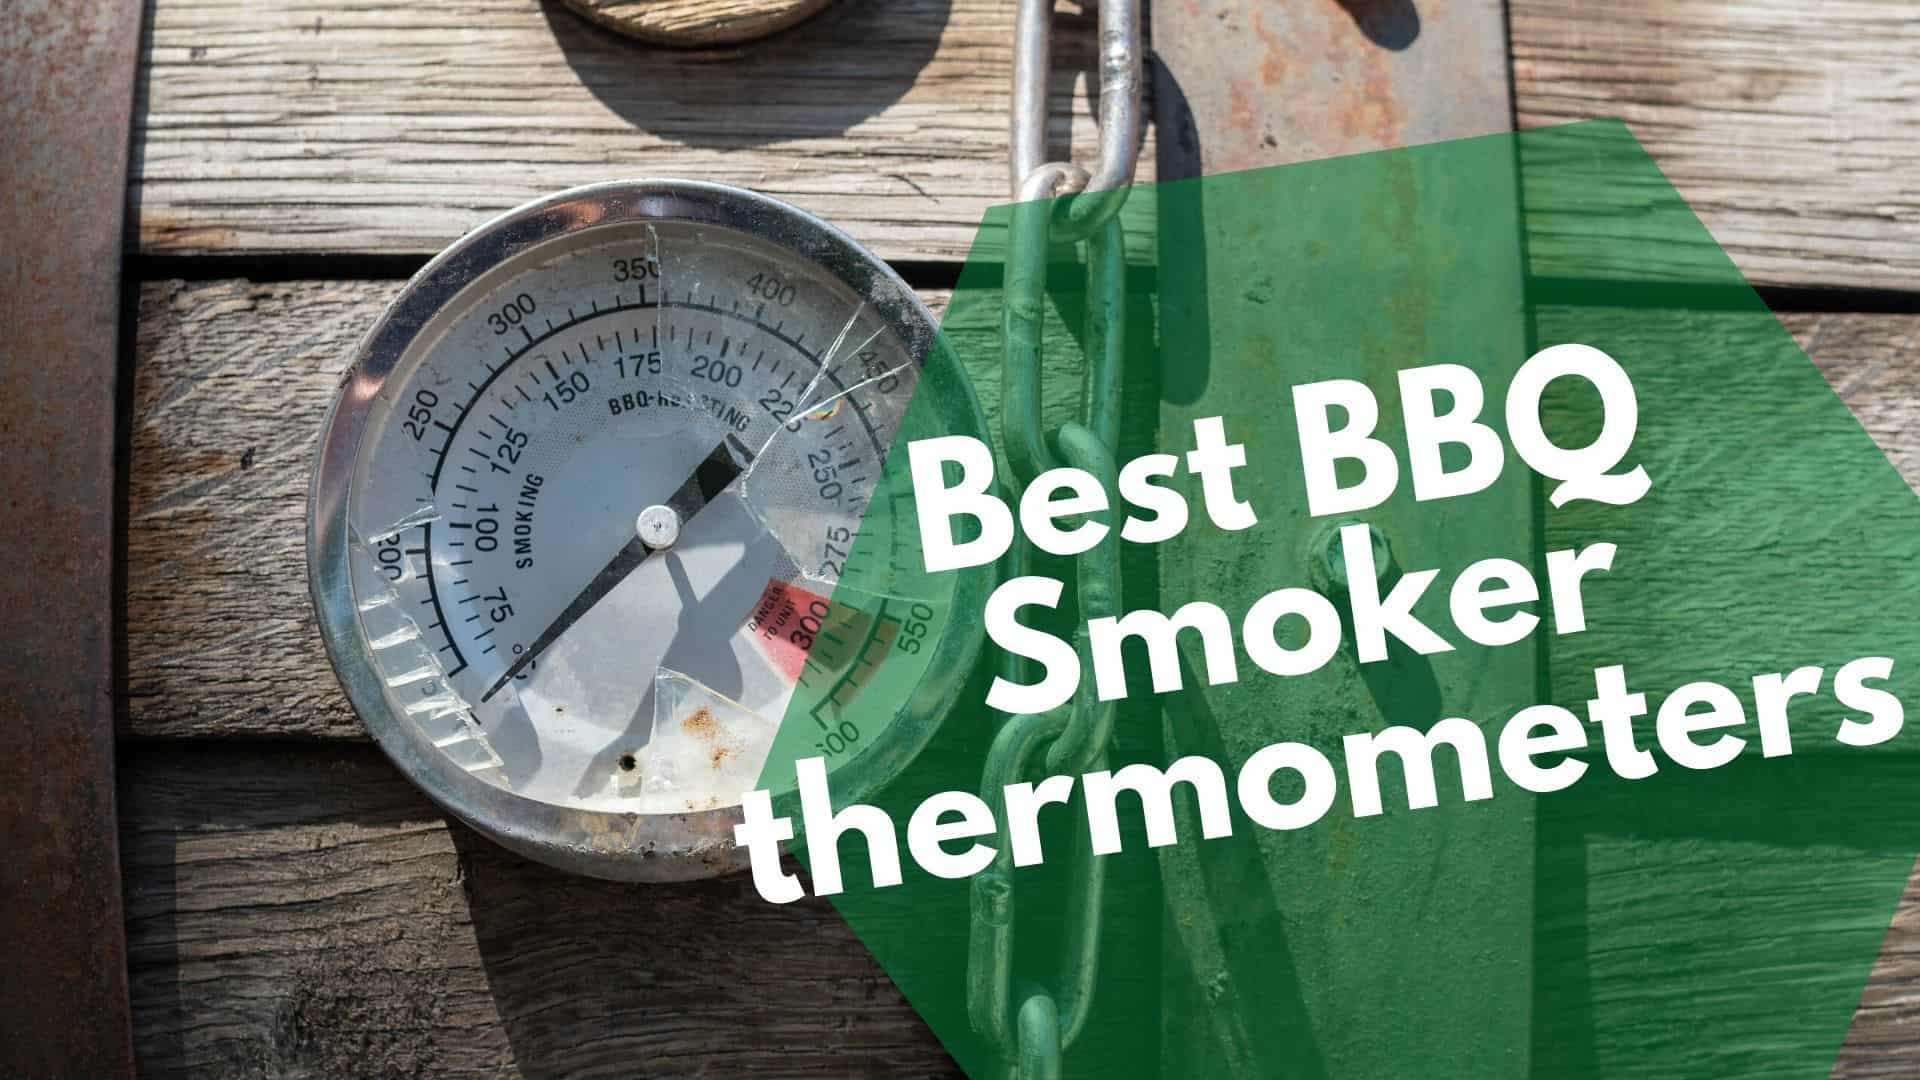 Best BBQ Smoker thermometers